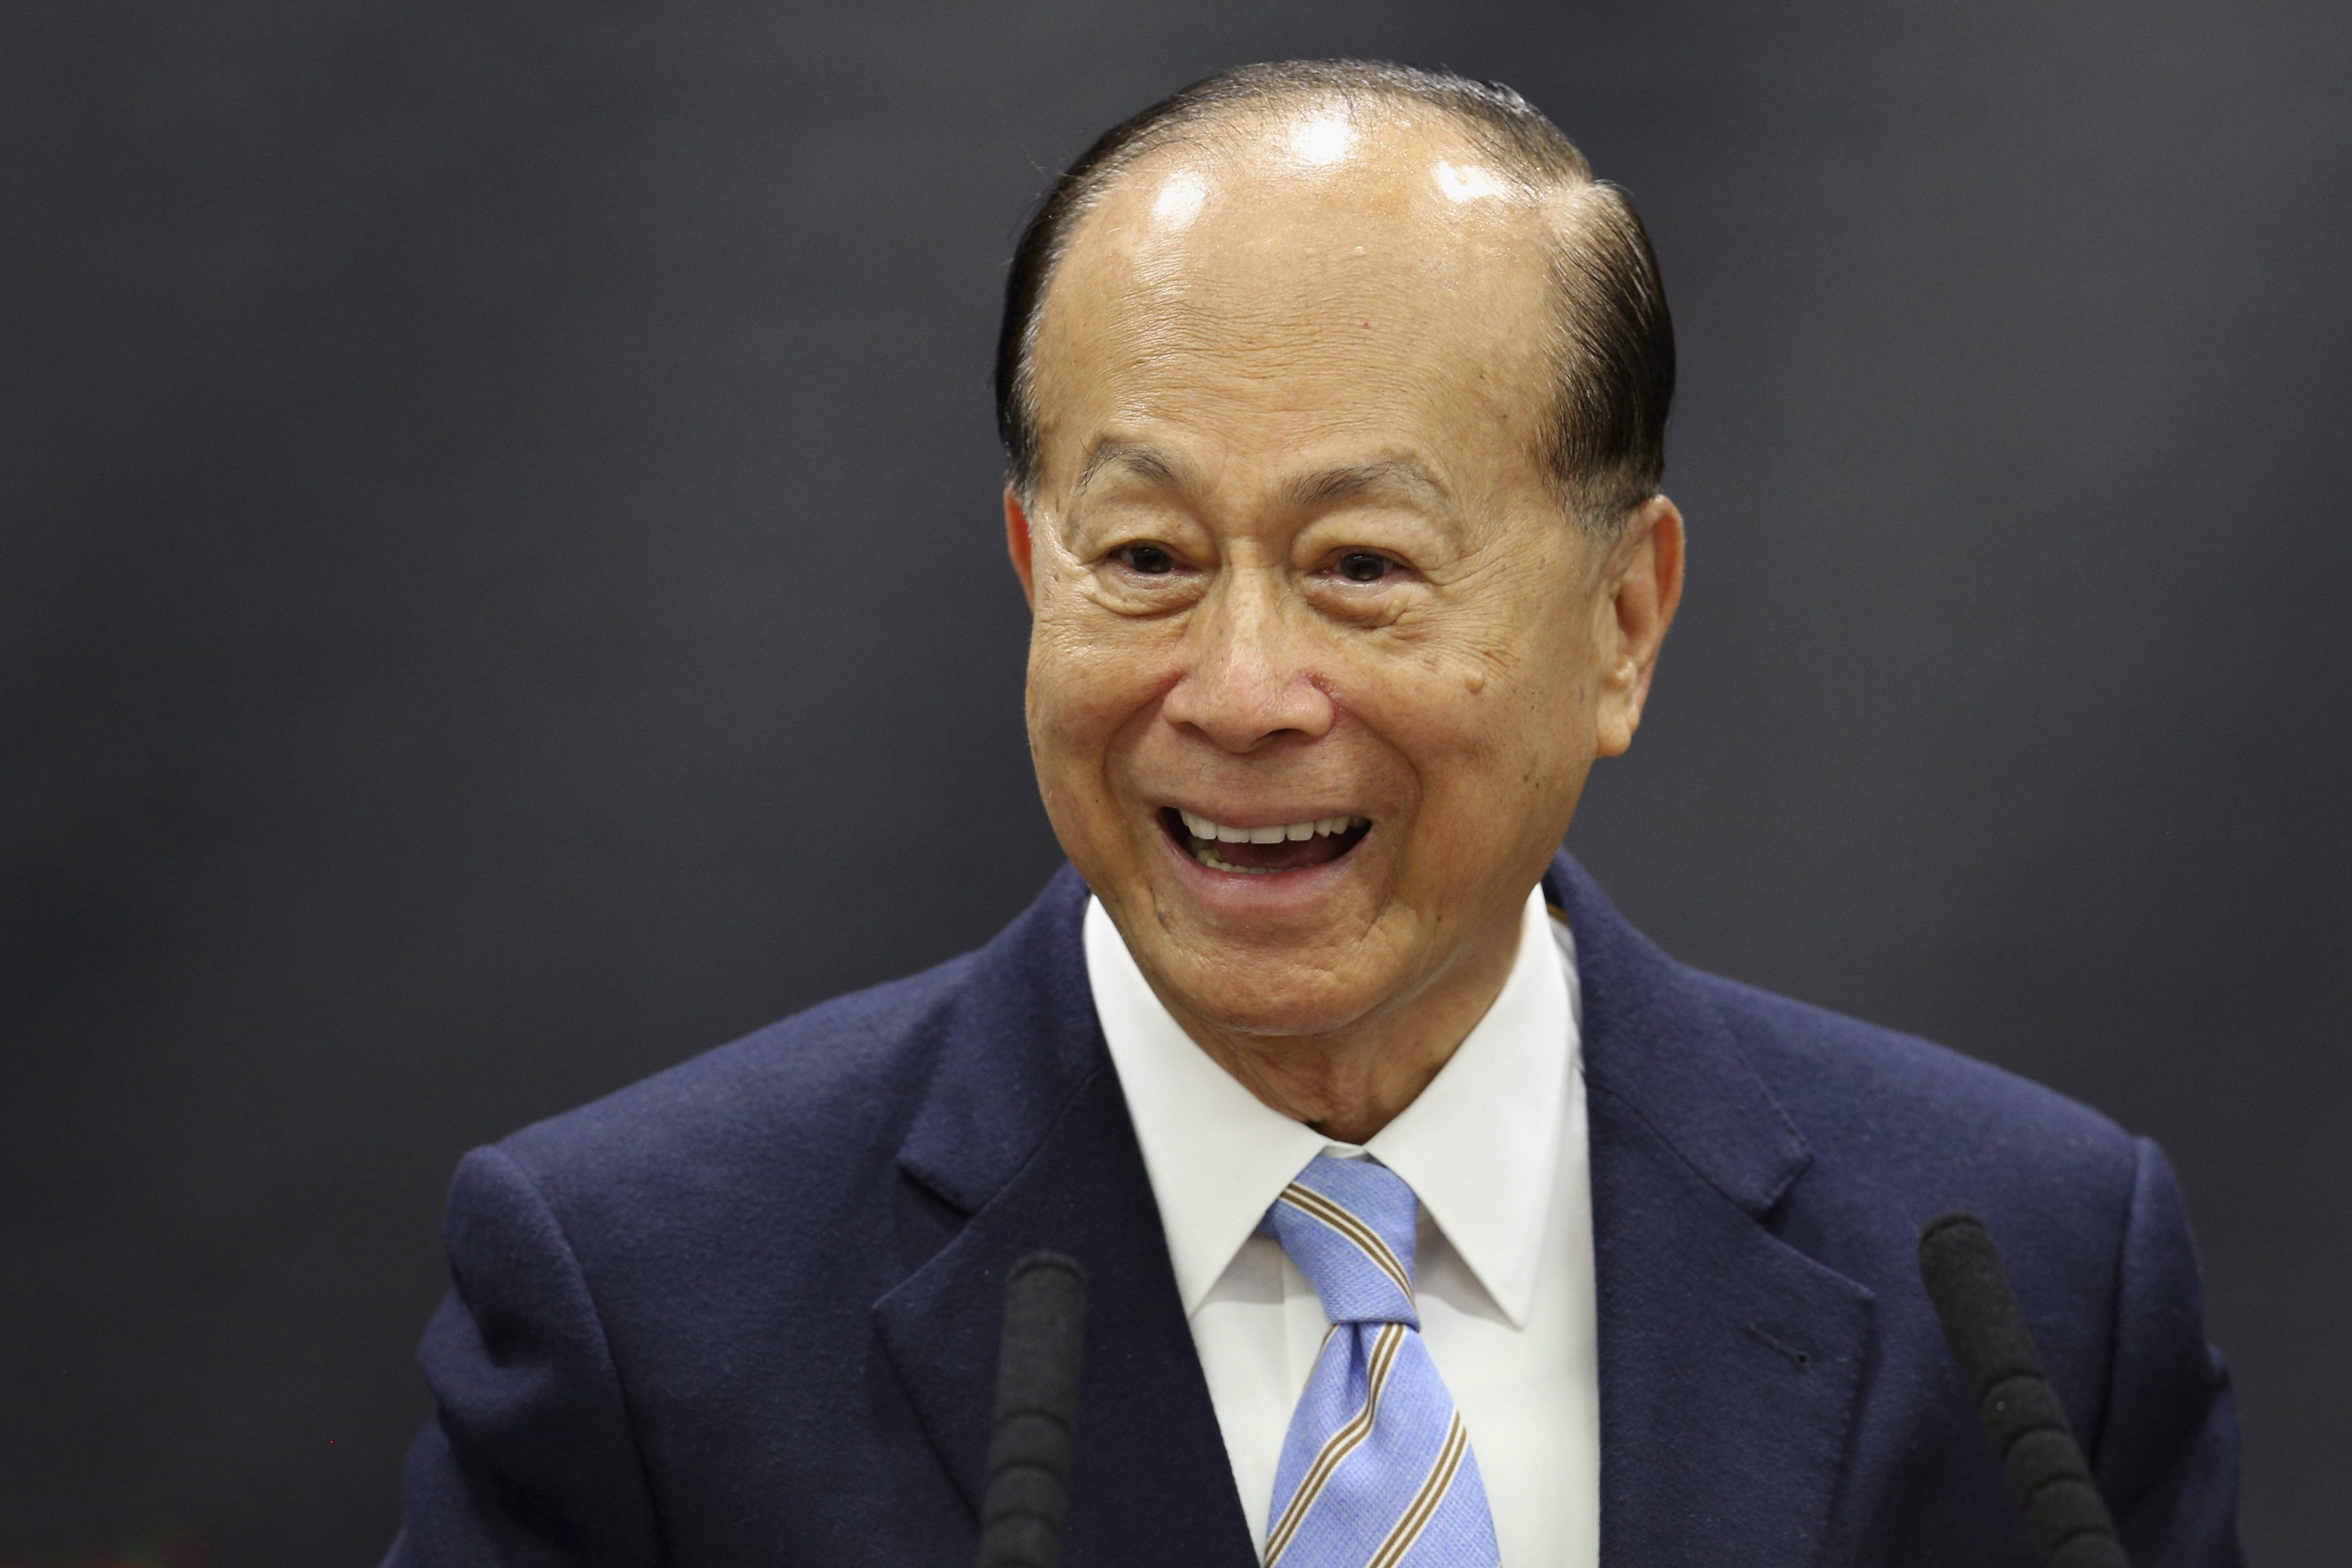 'I have done business internationally for more than 30 years. It is the first time I’ve heard comments about "pulling out assets" from Hong Kong', said Li Ka-shing. Photo: Reuters